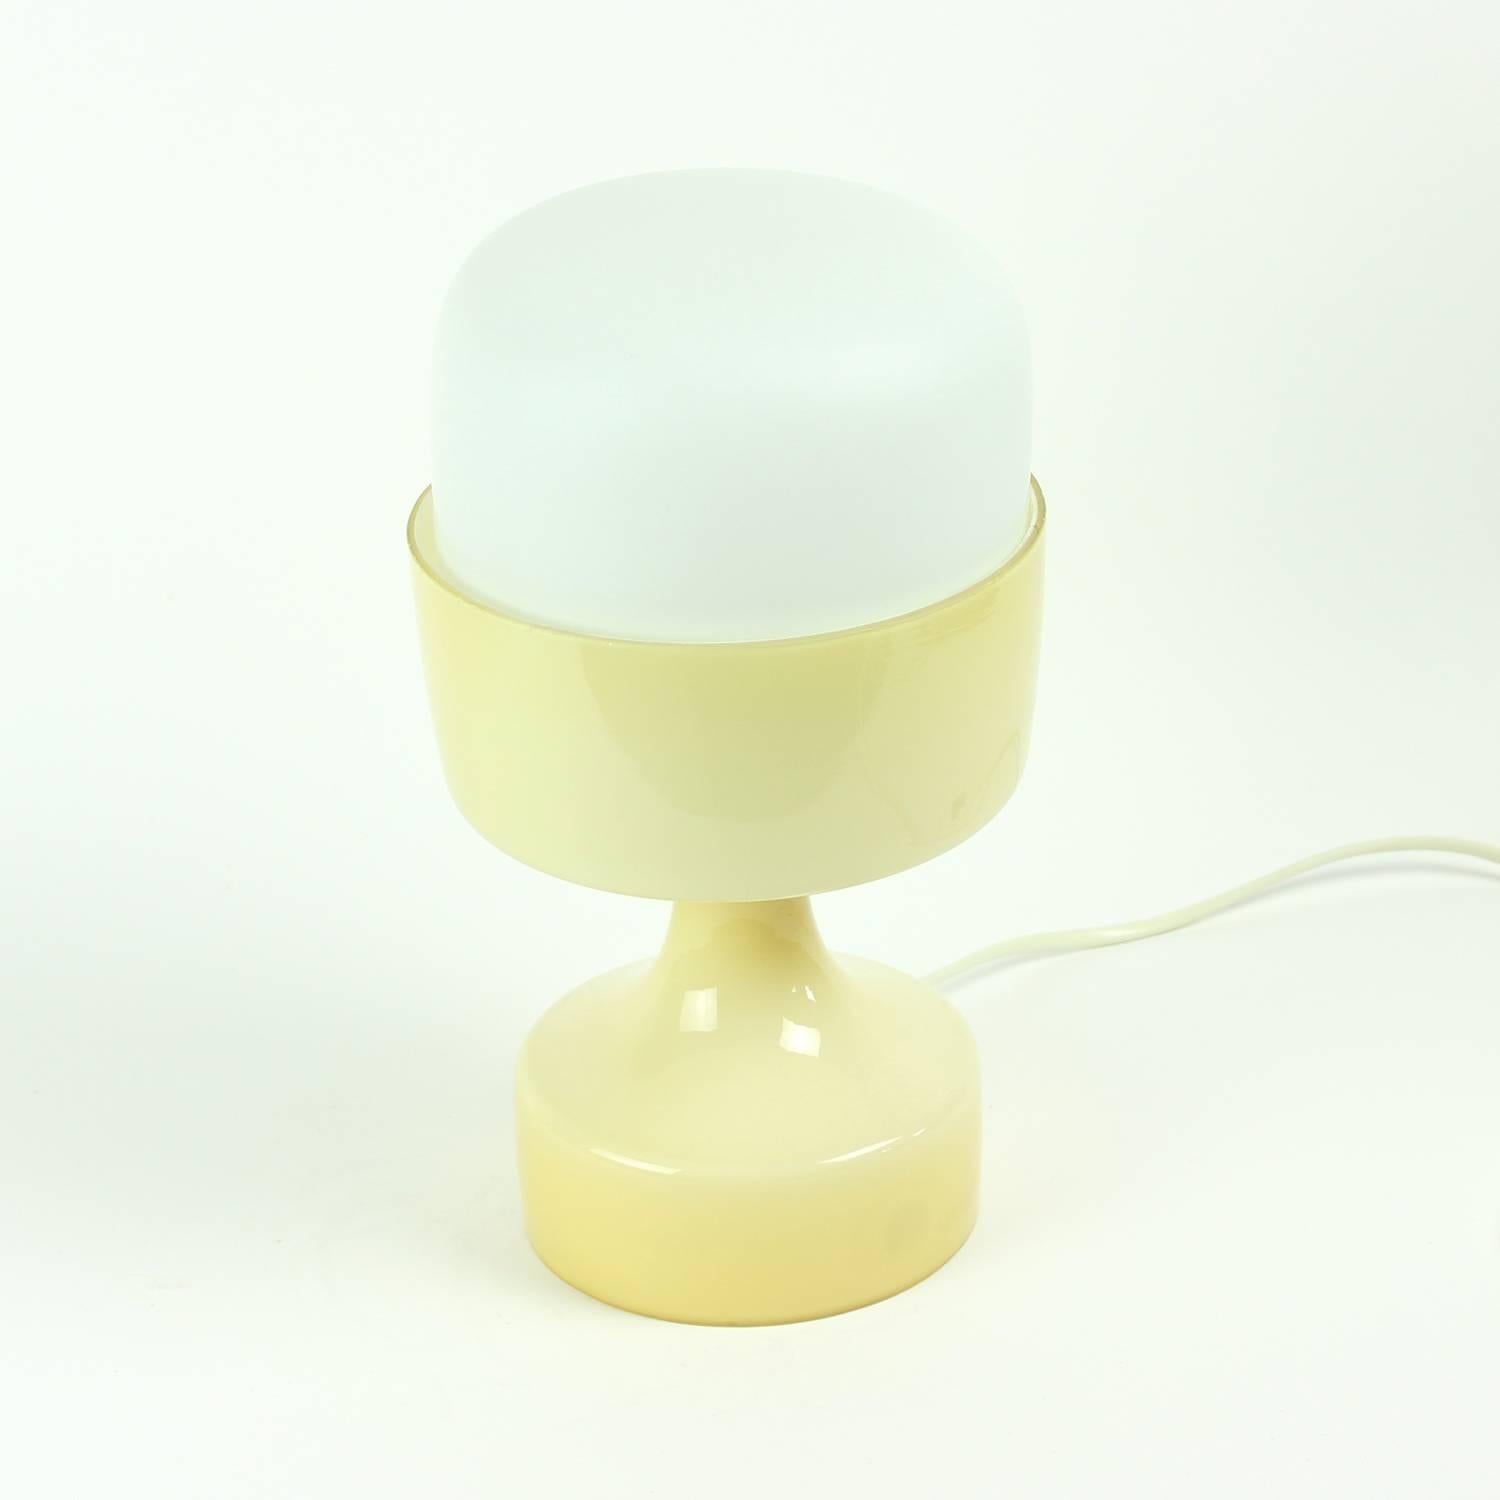 Beautiful and rare table lamp designed by Czech designer Ivan Jakes for Osvetlovací Sklo. Made of two pieces of opaline glass. The top shield is of matte finished, white opaline glass, bottom part is in shiny cream colored opaline glass. The lamp is